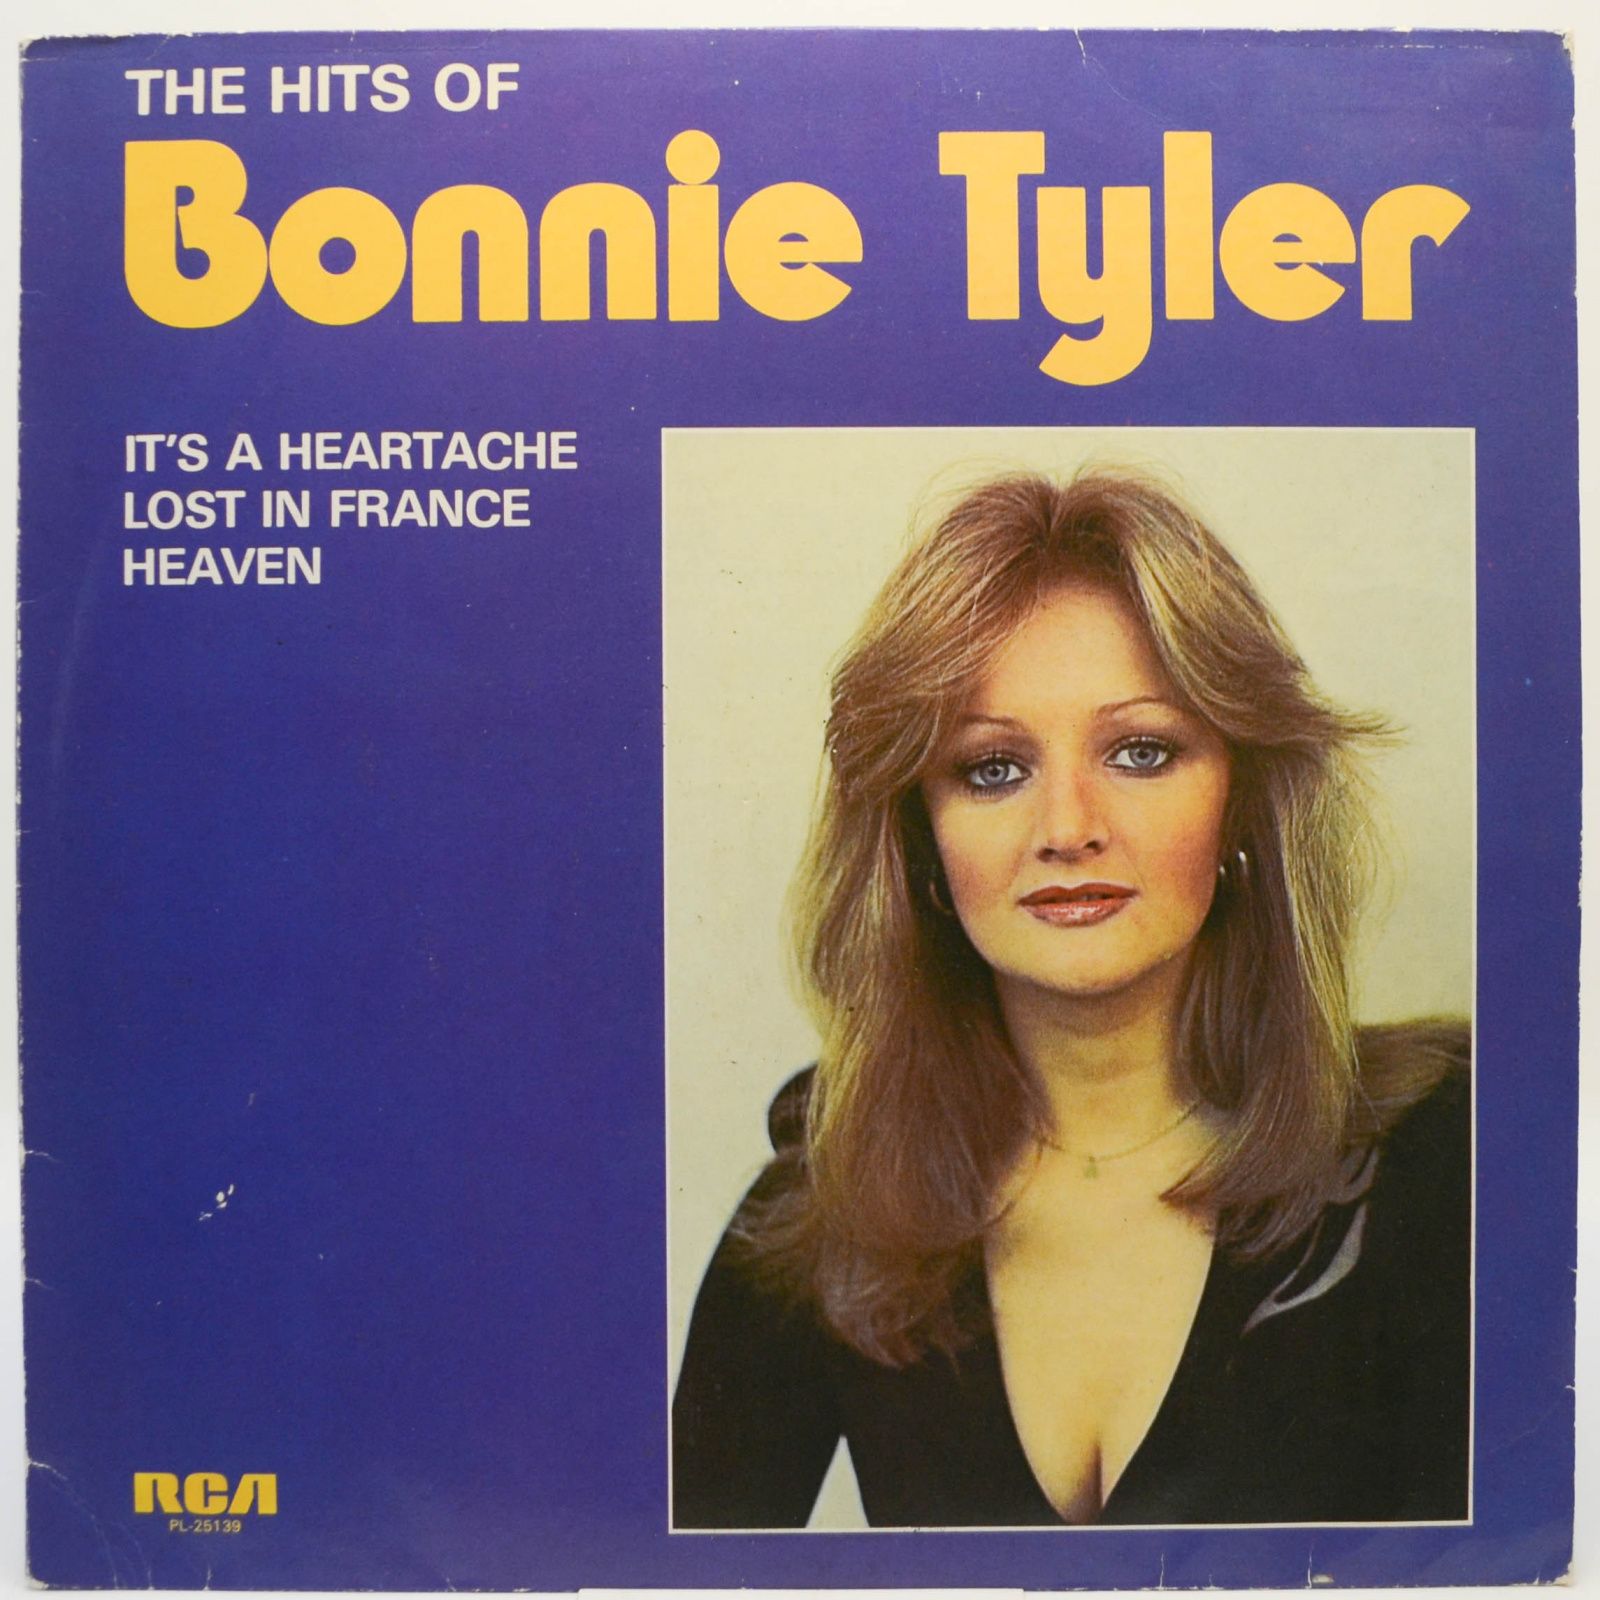 Bonnie Tyler — The Hits Of Bonnie Tyler, 1978